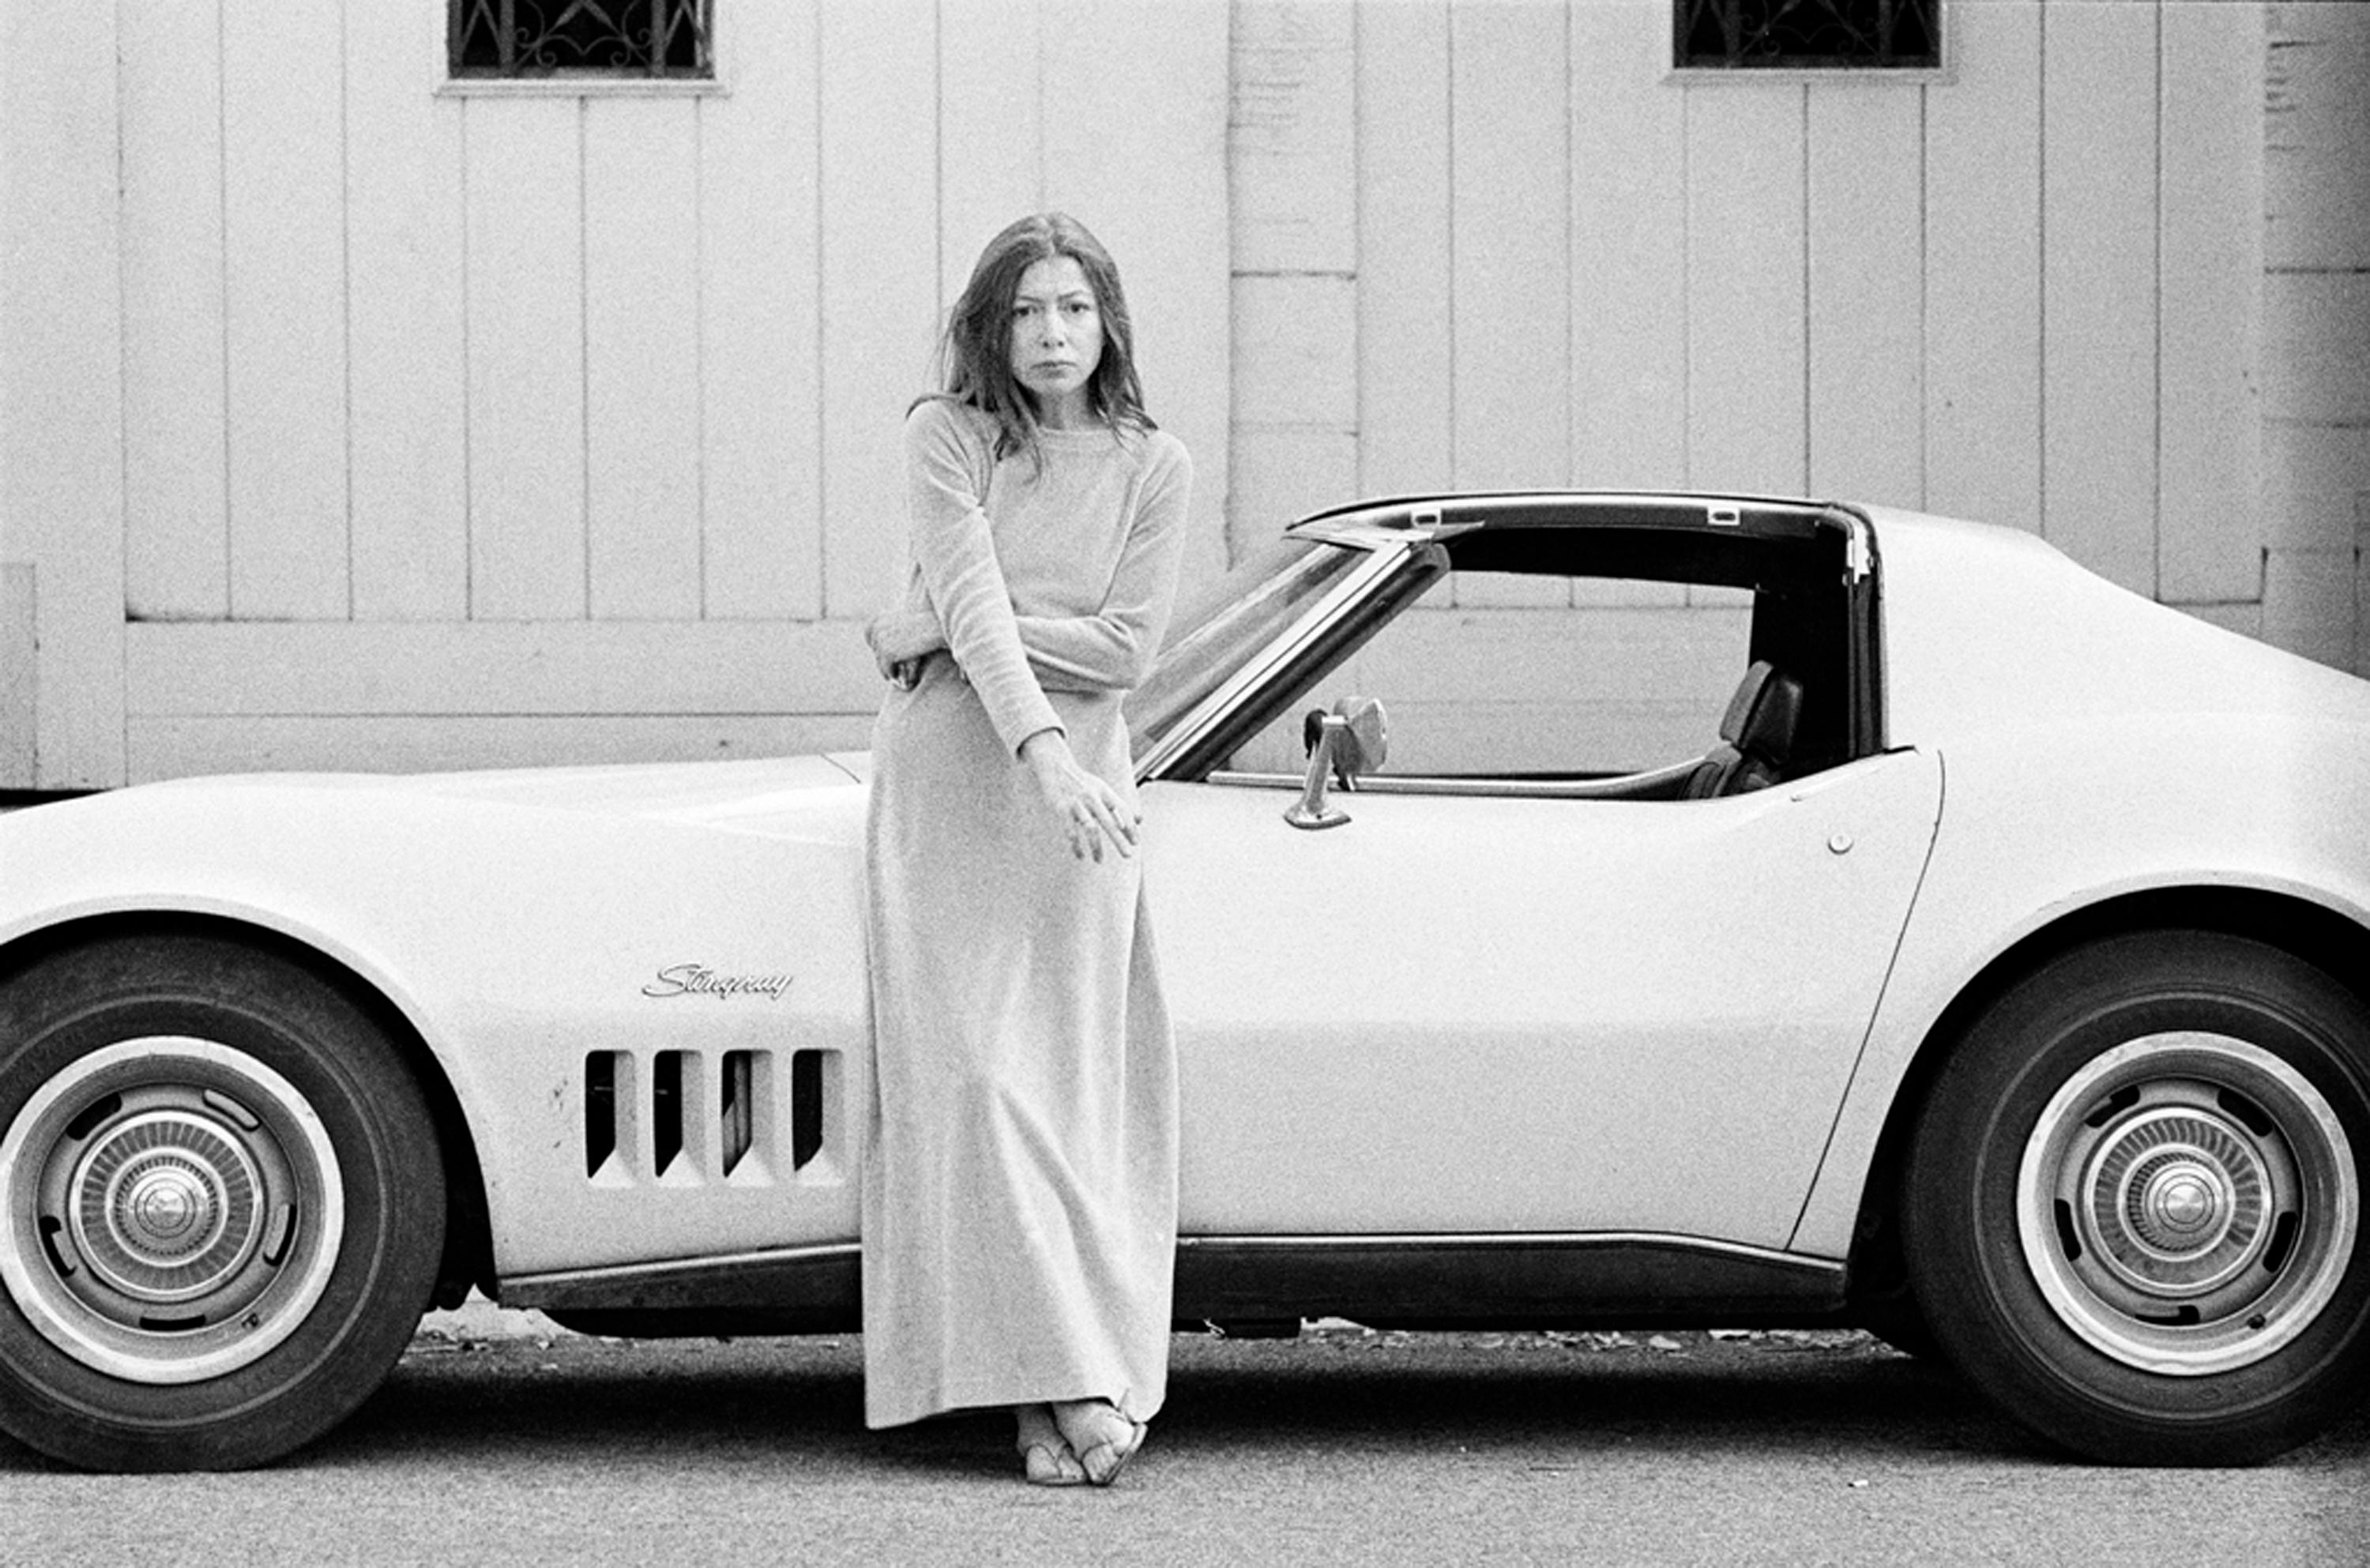 Julian Wasser Color Photograph - Joan Didion in front of her Stingray Corvette, 1968